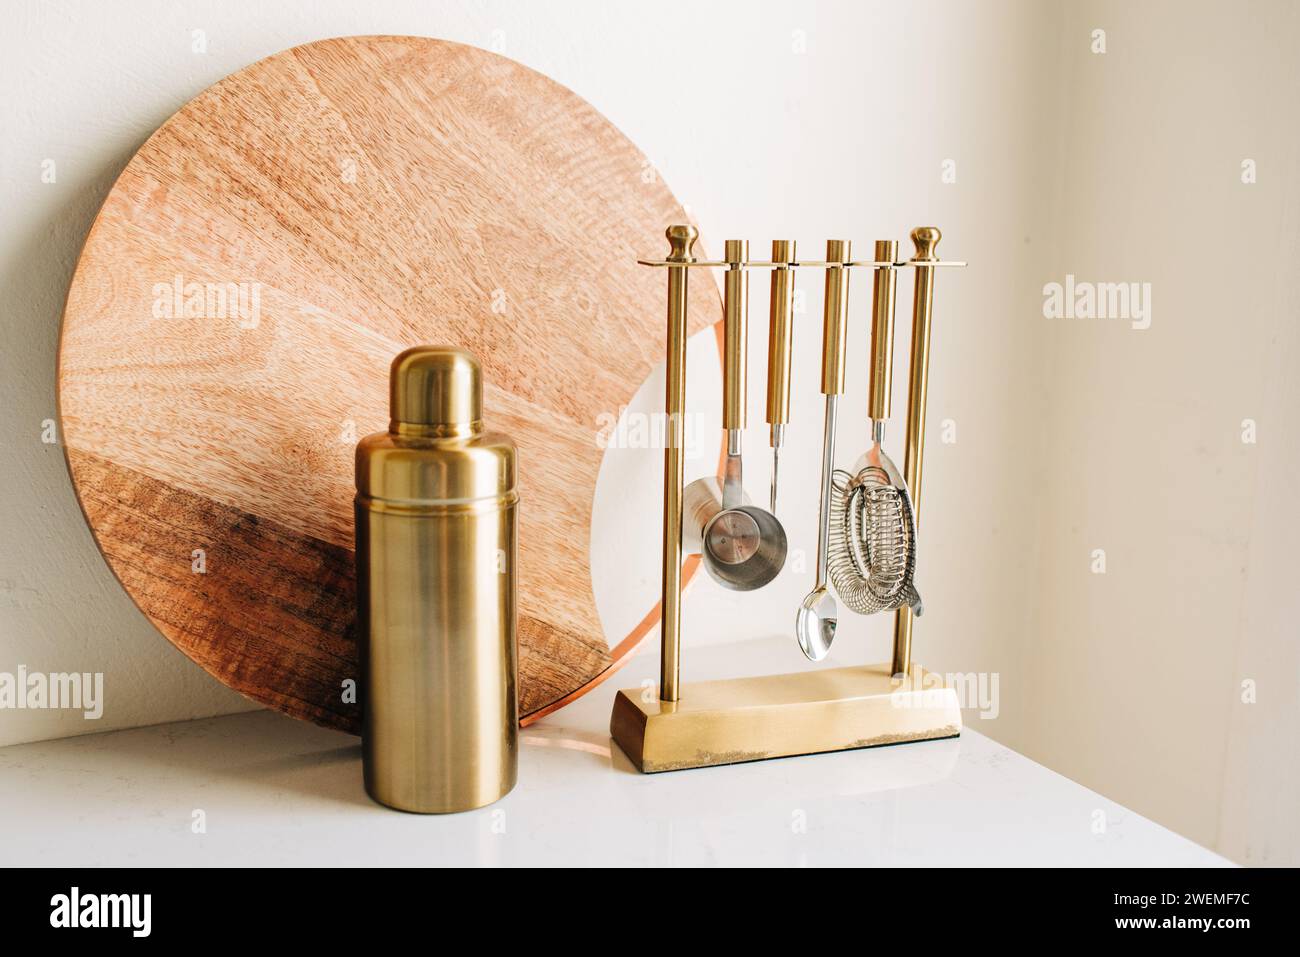 Wooden Cutting Board and Gold Cocktail Mixing Set on White Counter Stock Photo